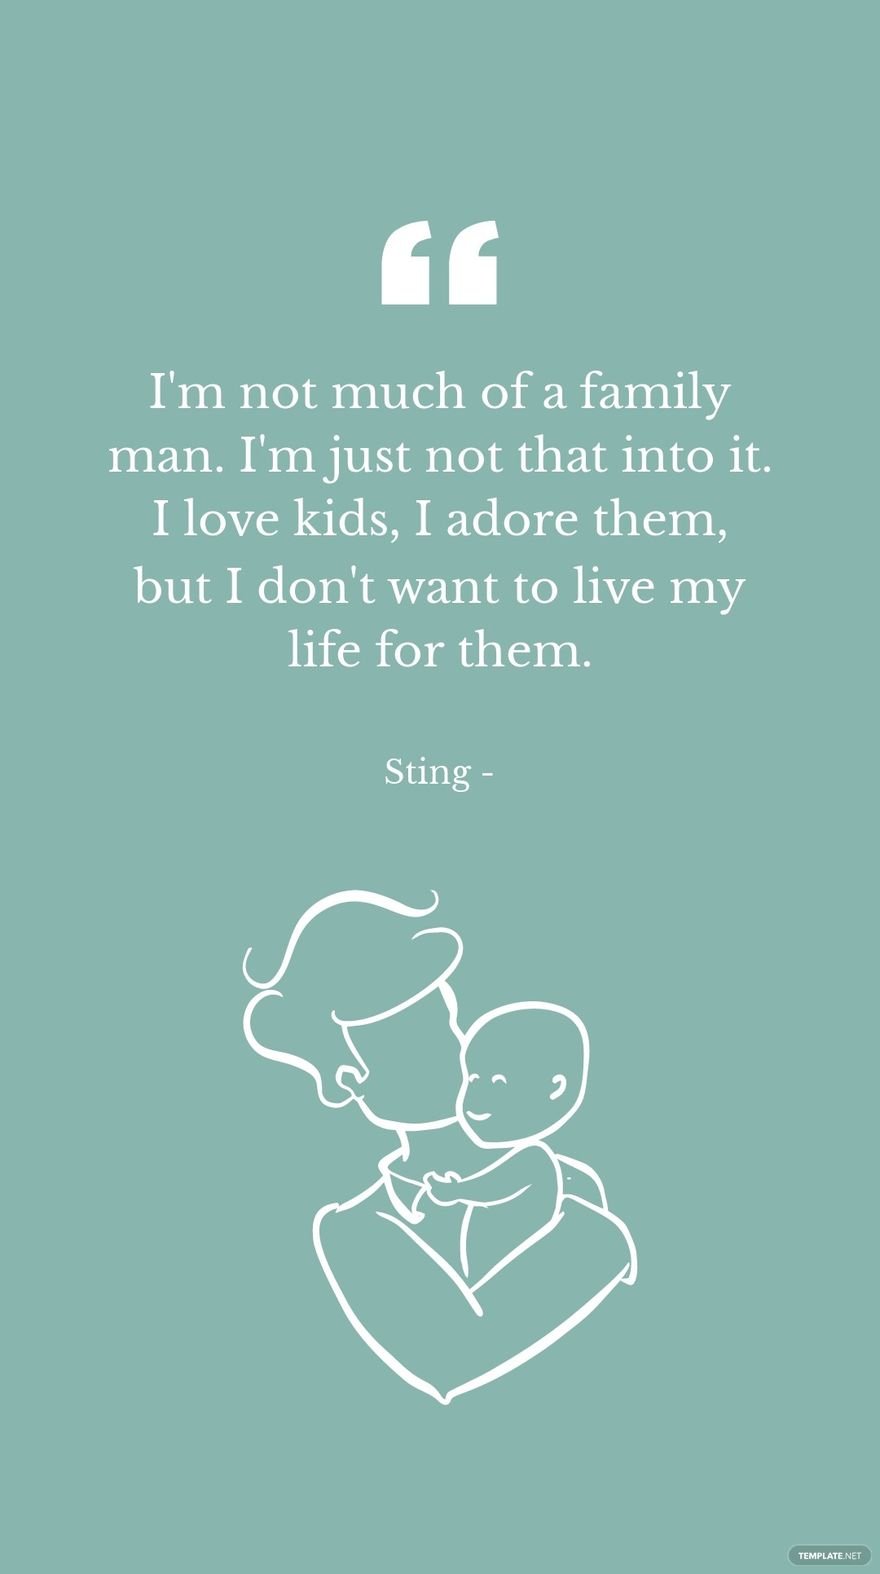 Sting - I'm not much of a family man. I'm just not that into it. I love kids, I adore them, but I don't want to live my life for them.